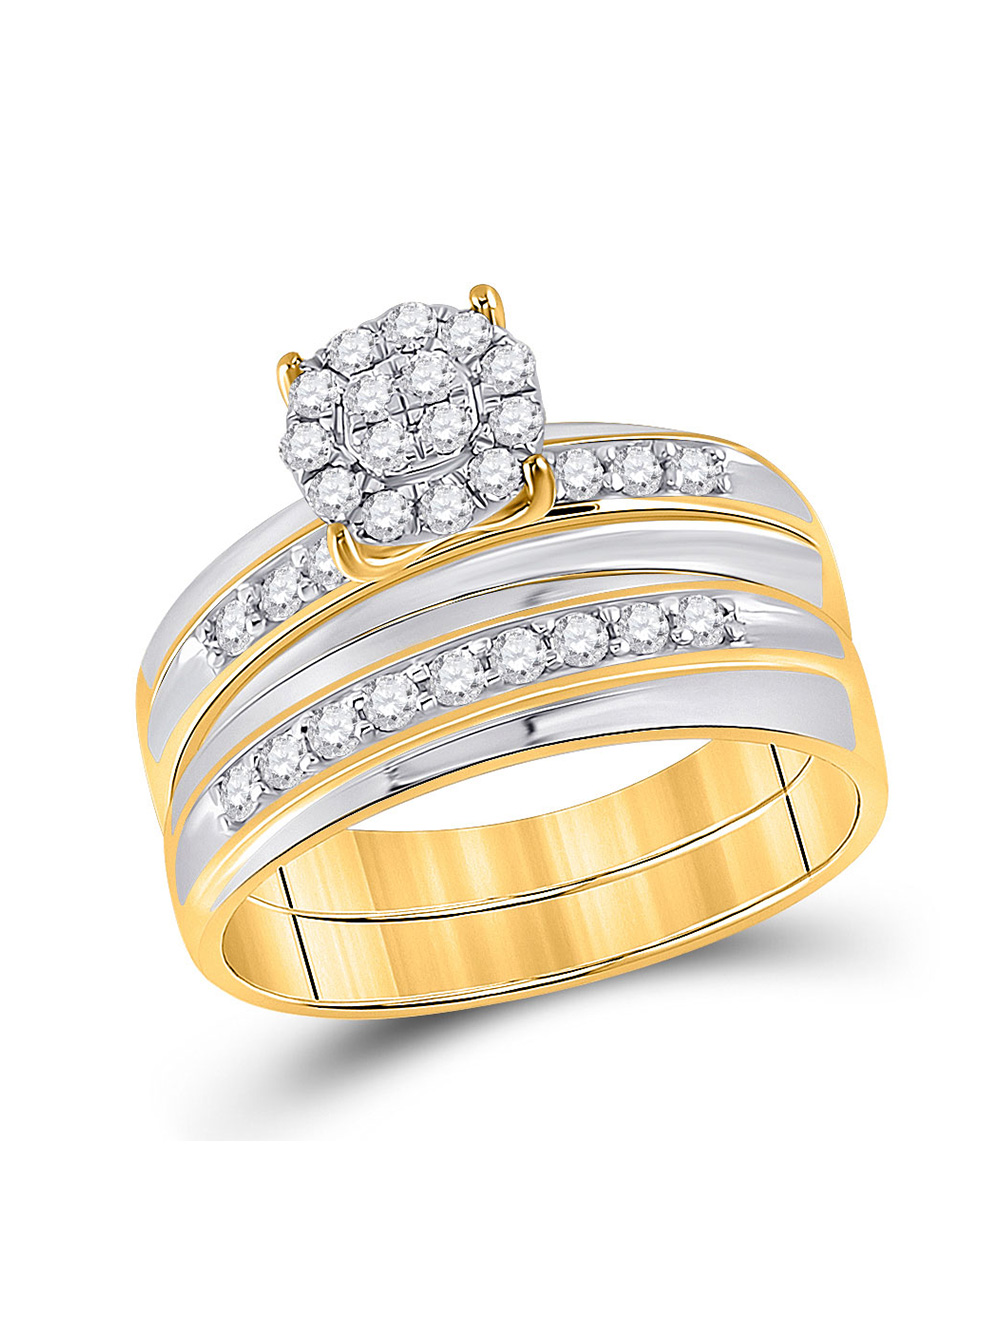 Solid 14k Two Tone White and Yellow Gold His and Hers Round Diamond ...